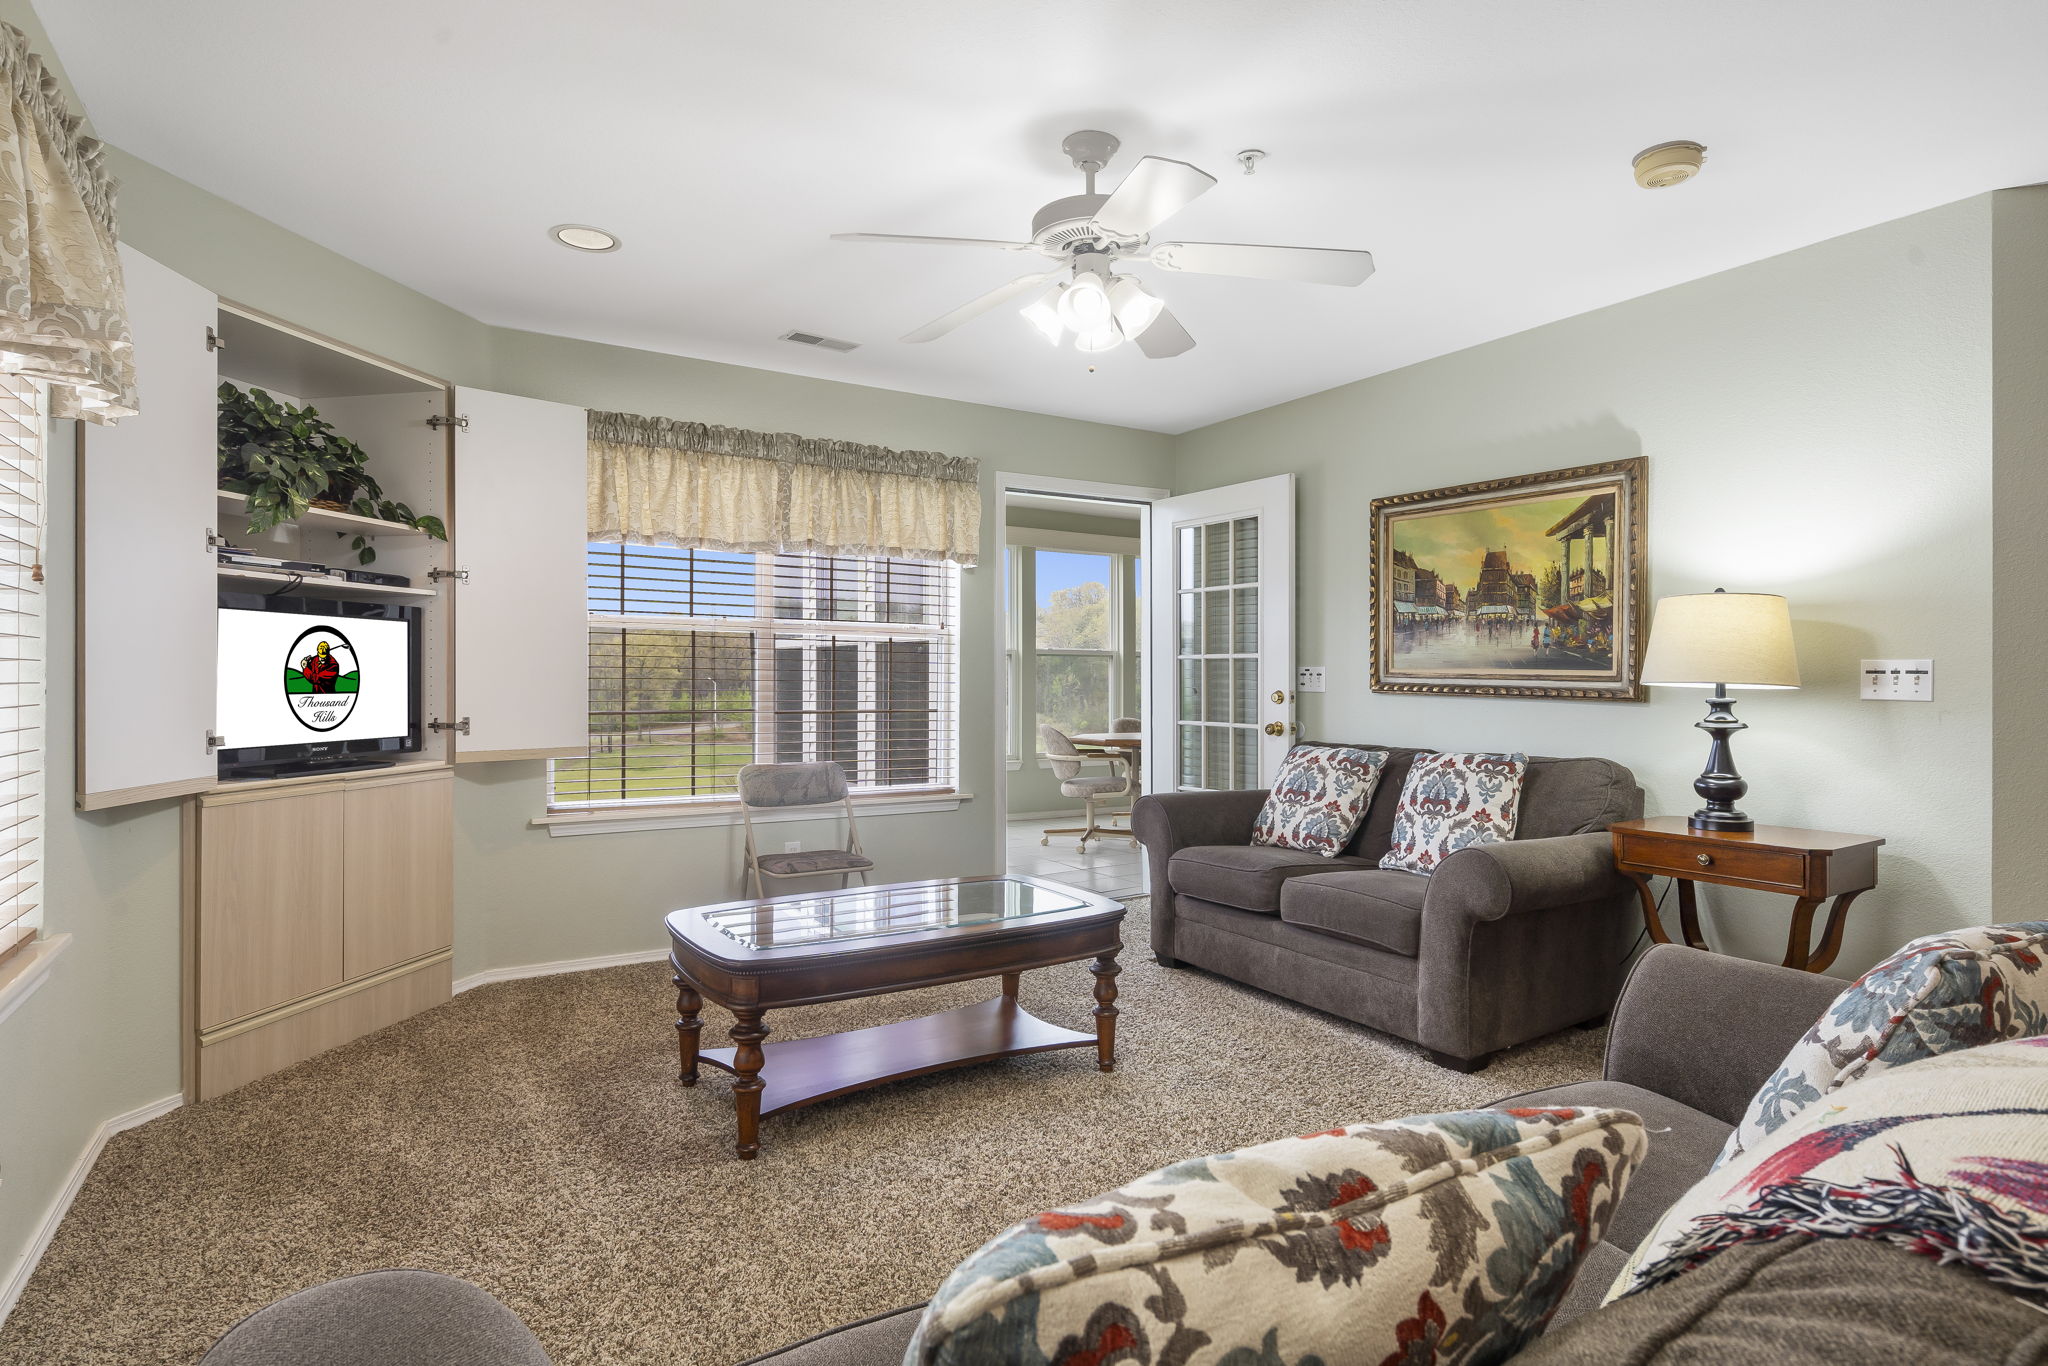 The Living Room features Sunroom Access, Cable TV/DVD, and a Sofa Bed